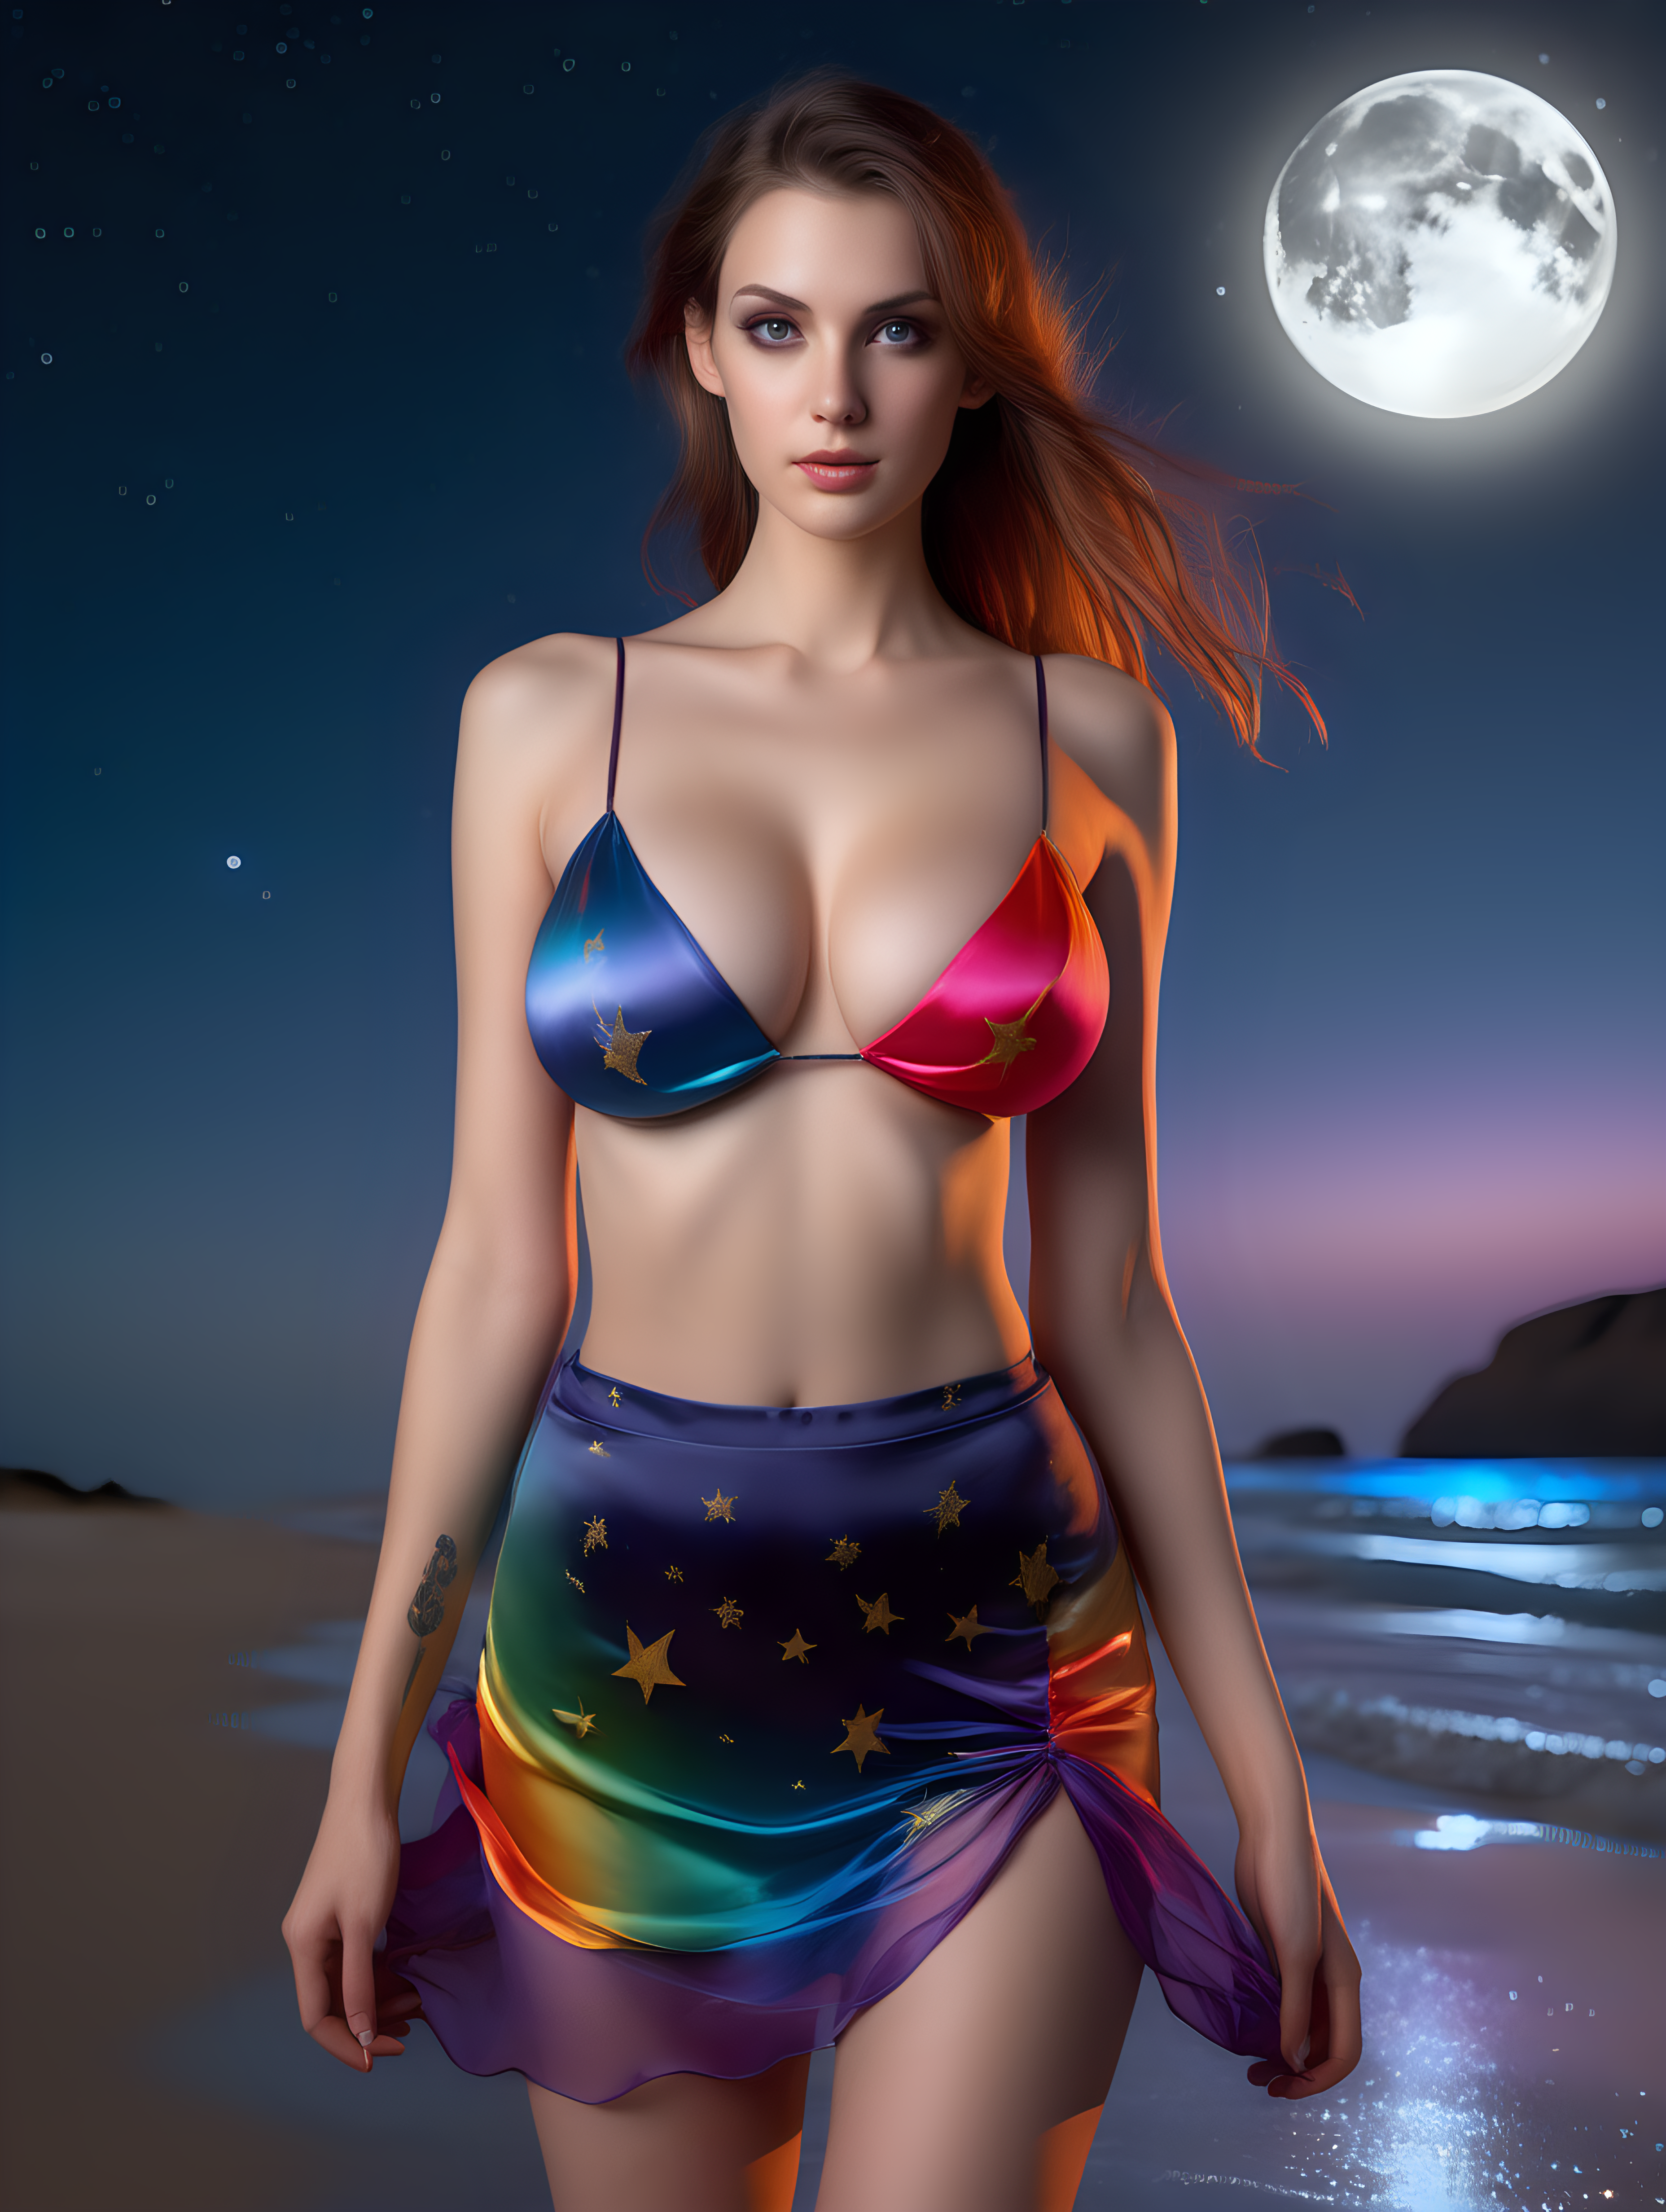 ultra-realistic high resolution and highly detailed adult film photoshoot of a slender female human, with massive firm breasts, she has draconic symbols on her arms and body, wearing a colourful transparent open front silk top and a short colourful silk skirt, walking on a beach with a starry sky and the moon in the background, looking at the camera